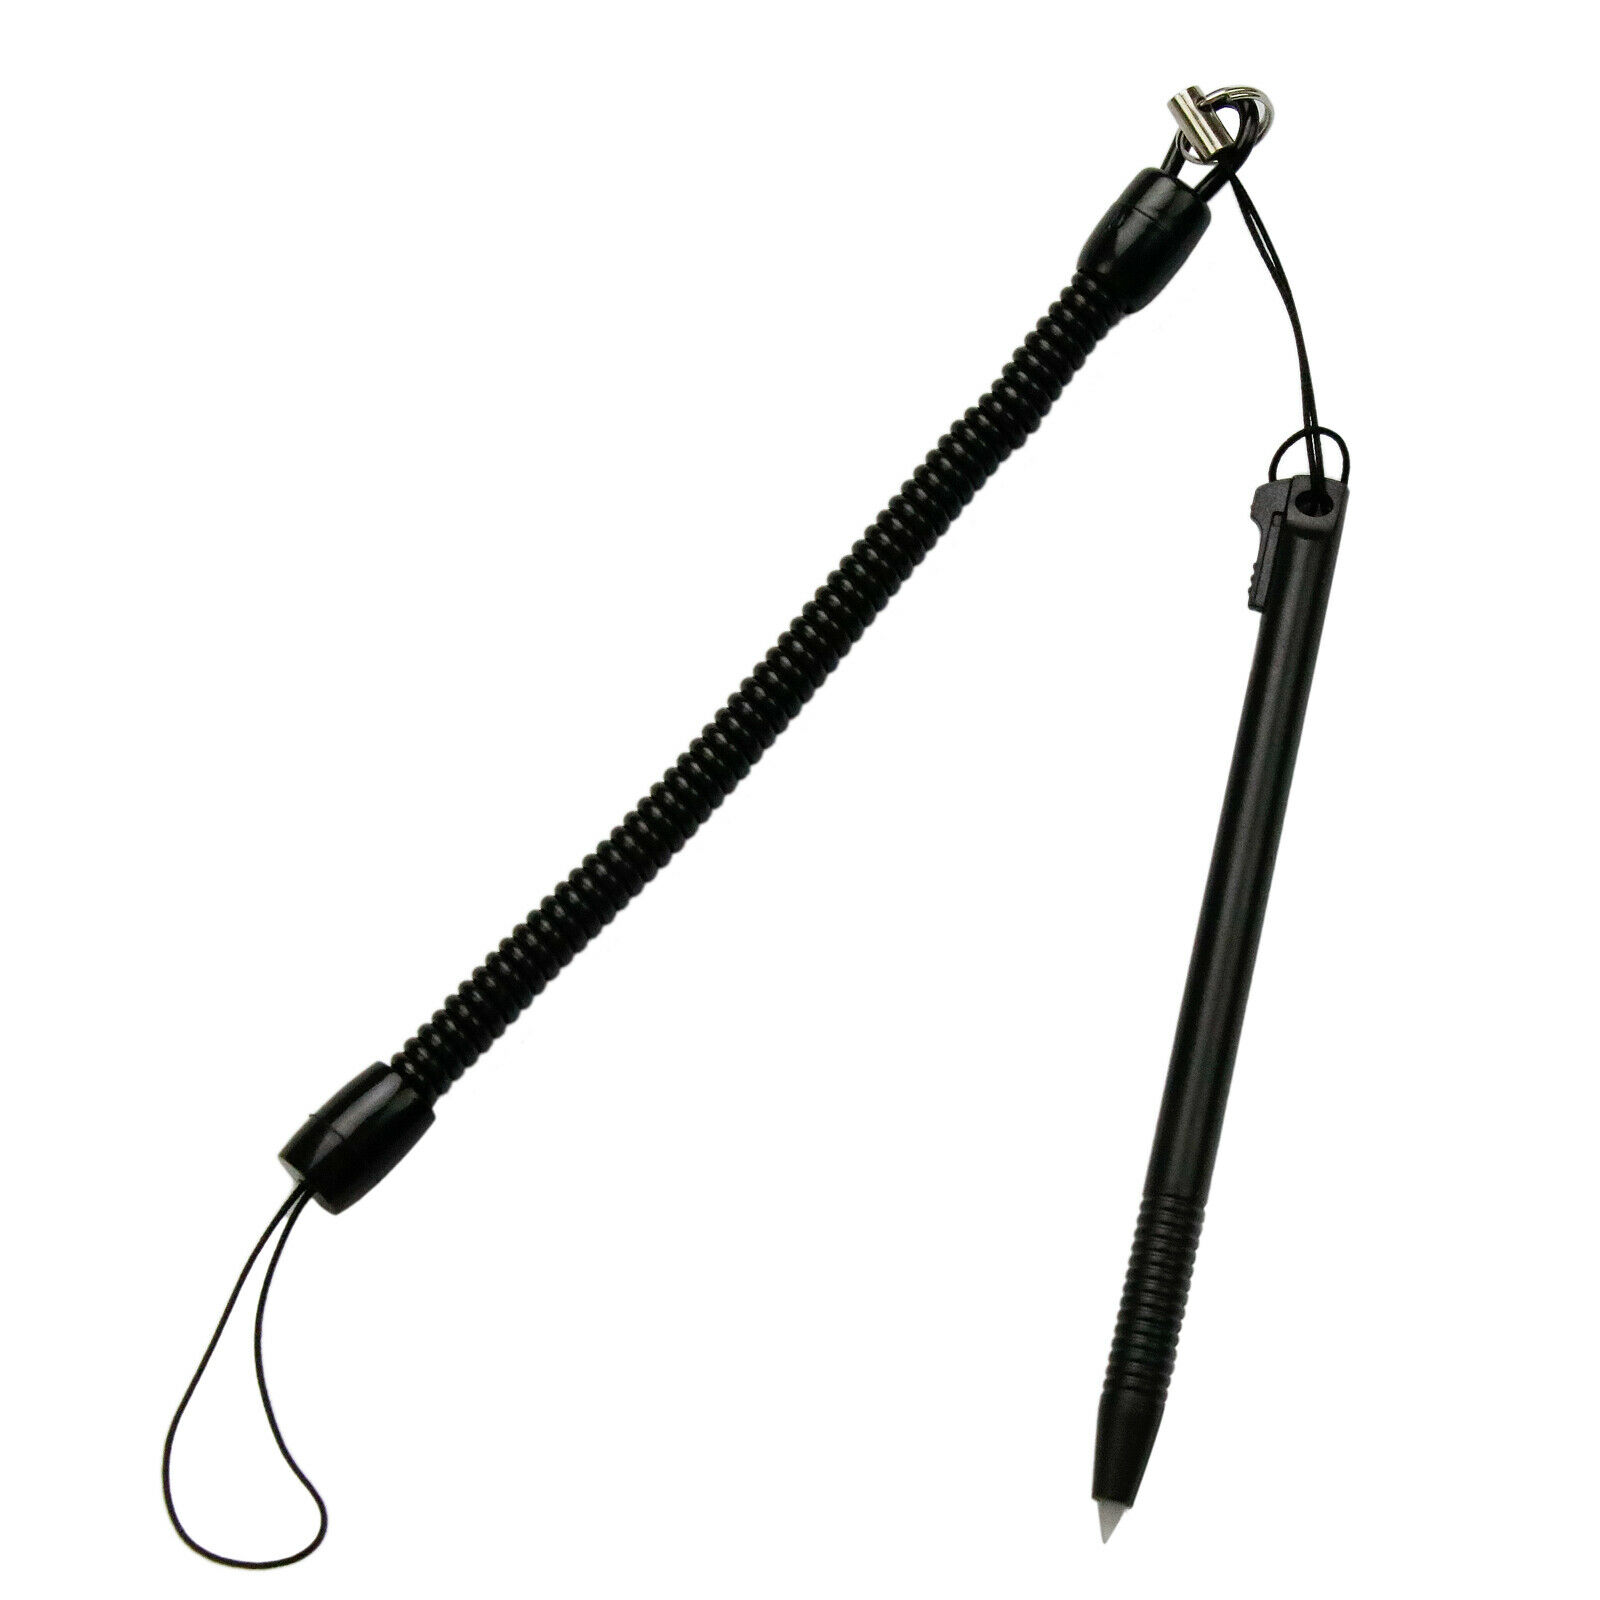 New Stylus Pen+tether Strap For Panasonic Toughbook Cf-18 Cf-19 Touchscreen